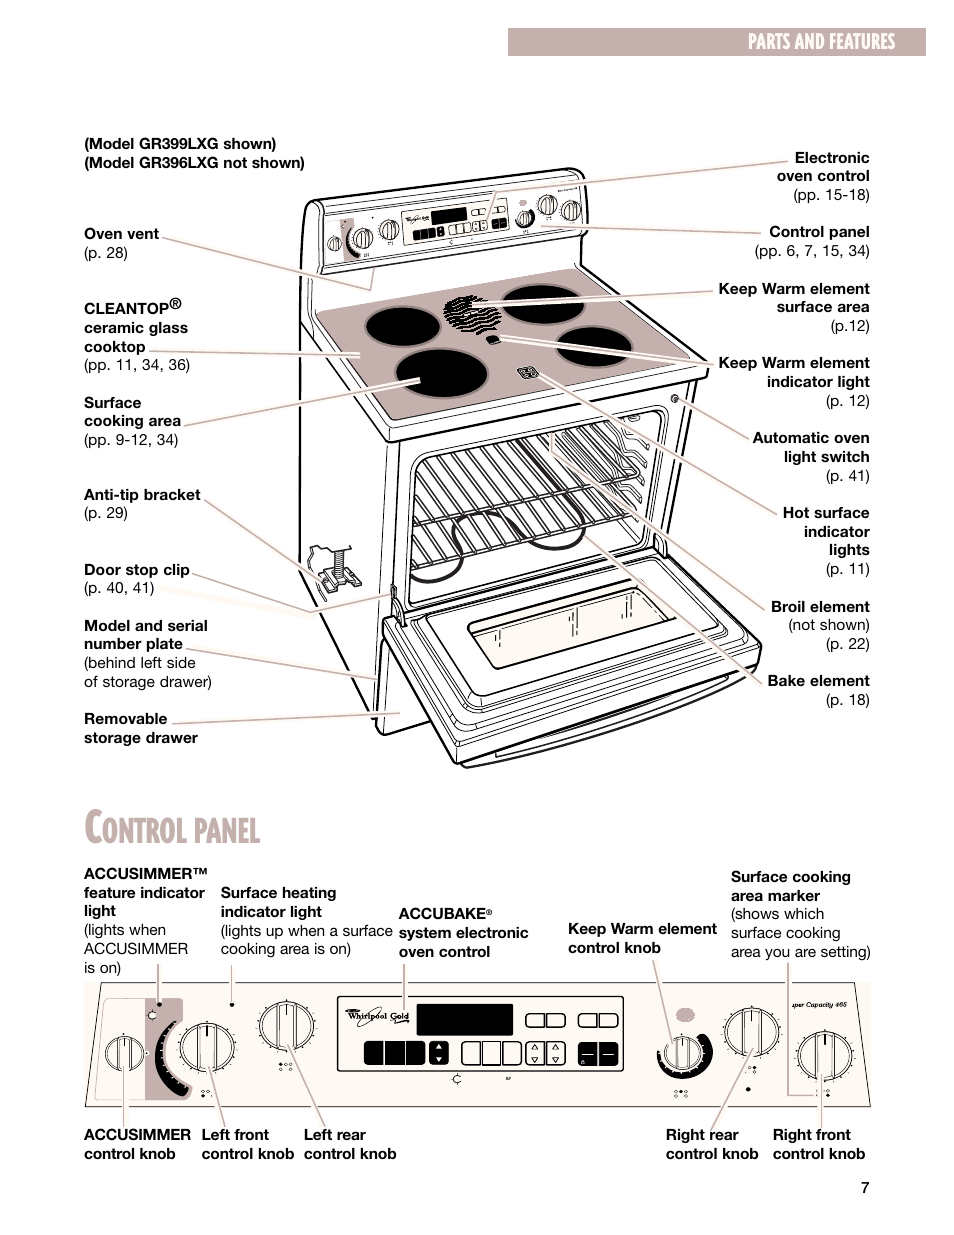 Ontrol panel, Parts and features, Accubake | Whirlpool GR399LXG User Manual  | Page 7 / 46 | Original mode